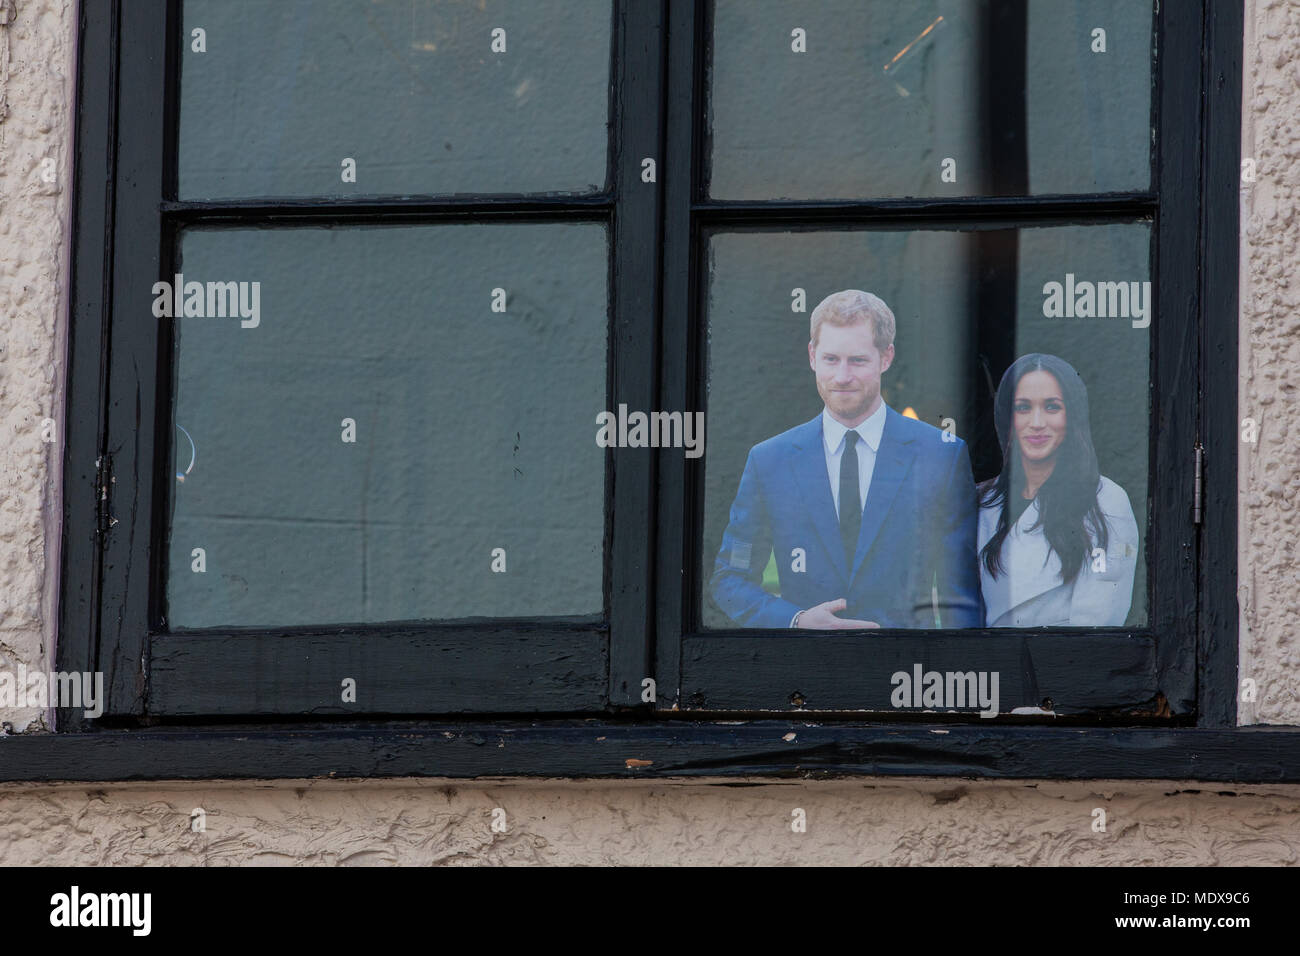 Windsor, UK. 20th April, 2018. A number of cutout figures of Prince Harry and Meghan Markle have appeared in windows around Windsor as preparations continue for the royal wedding next month. Credit: Mark Kerrison/Alamy Live News Stock Photo